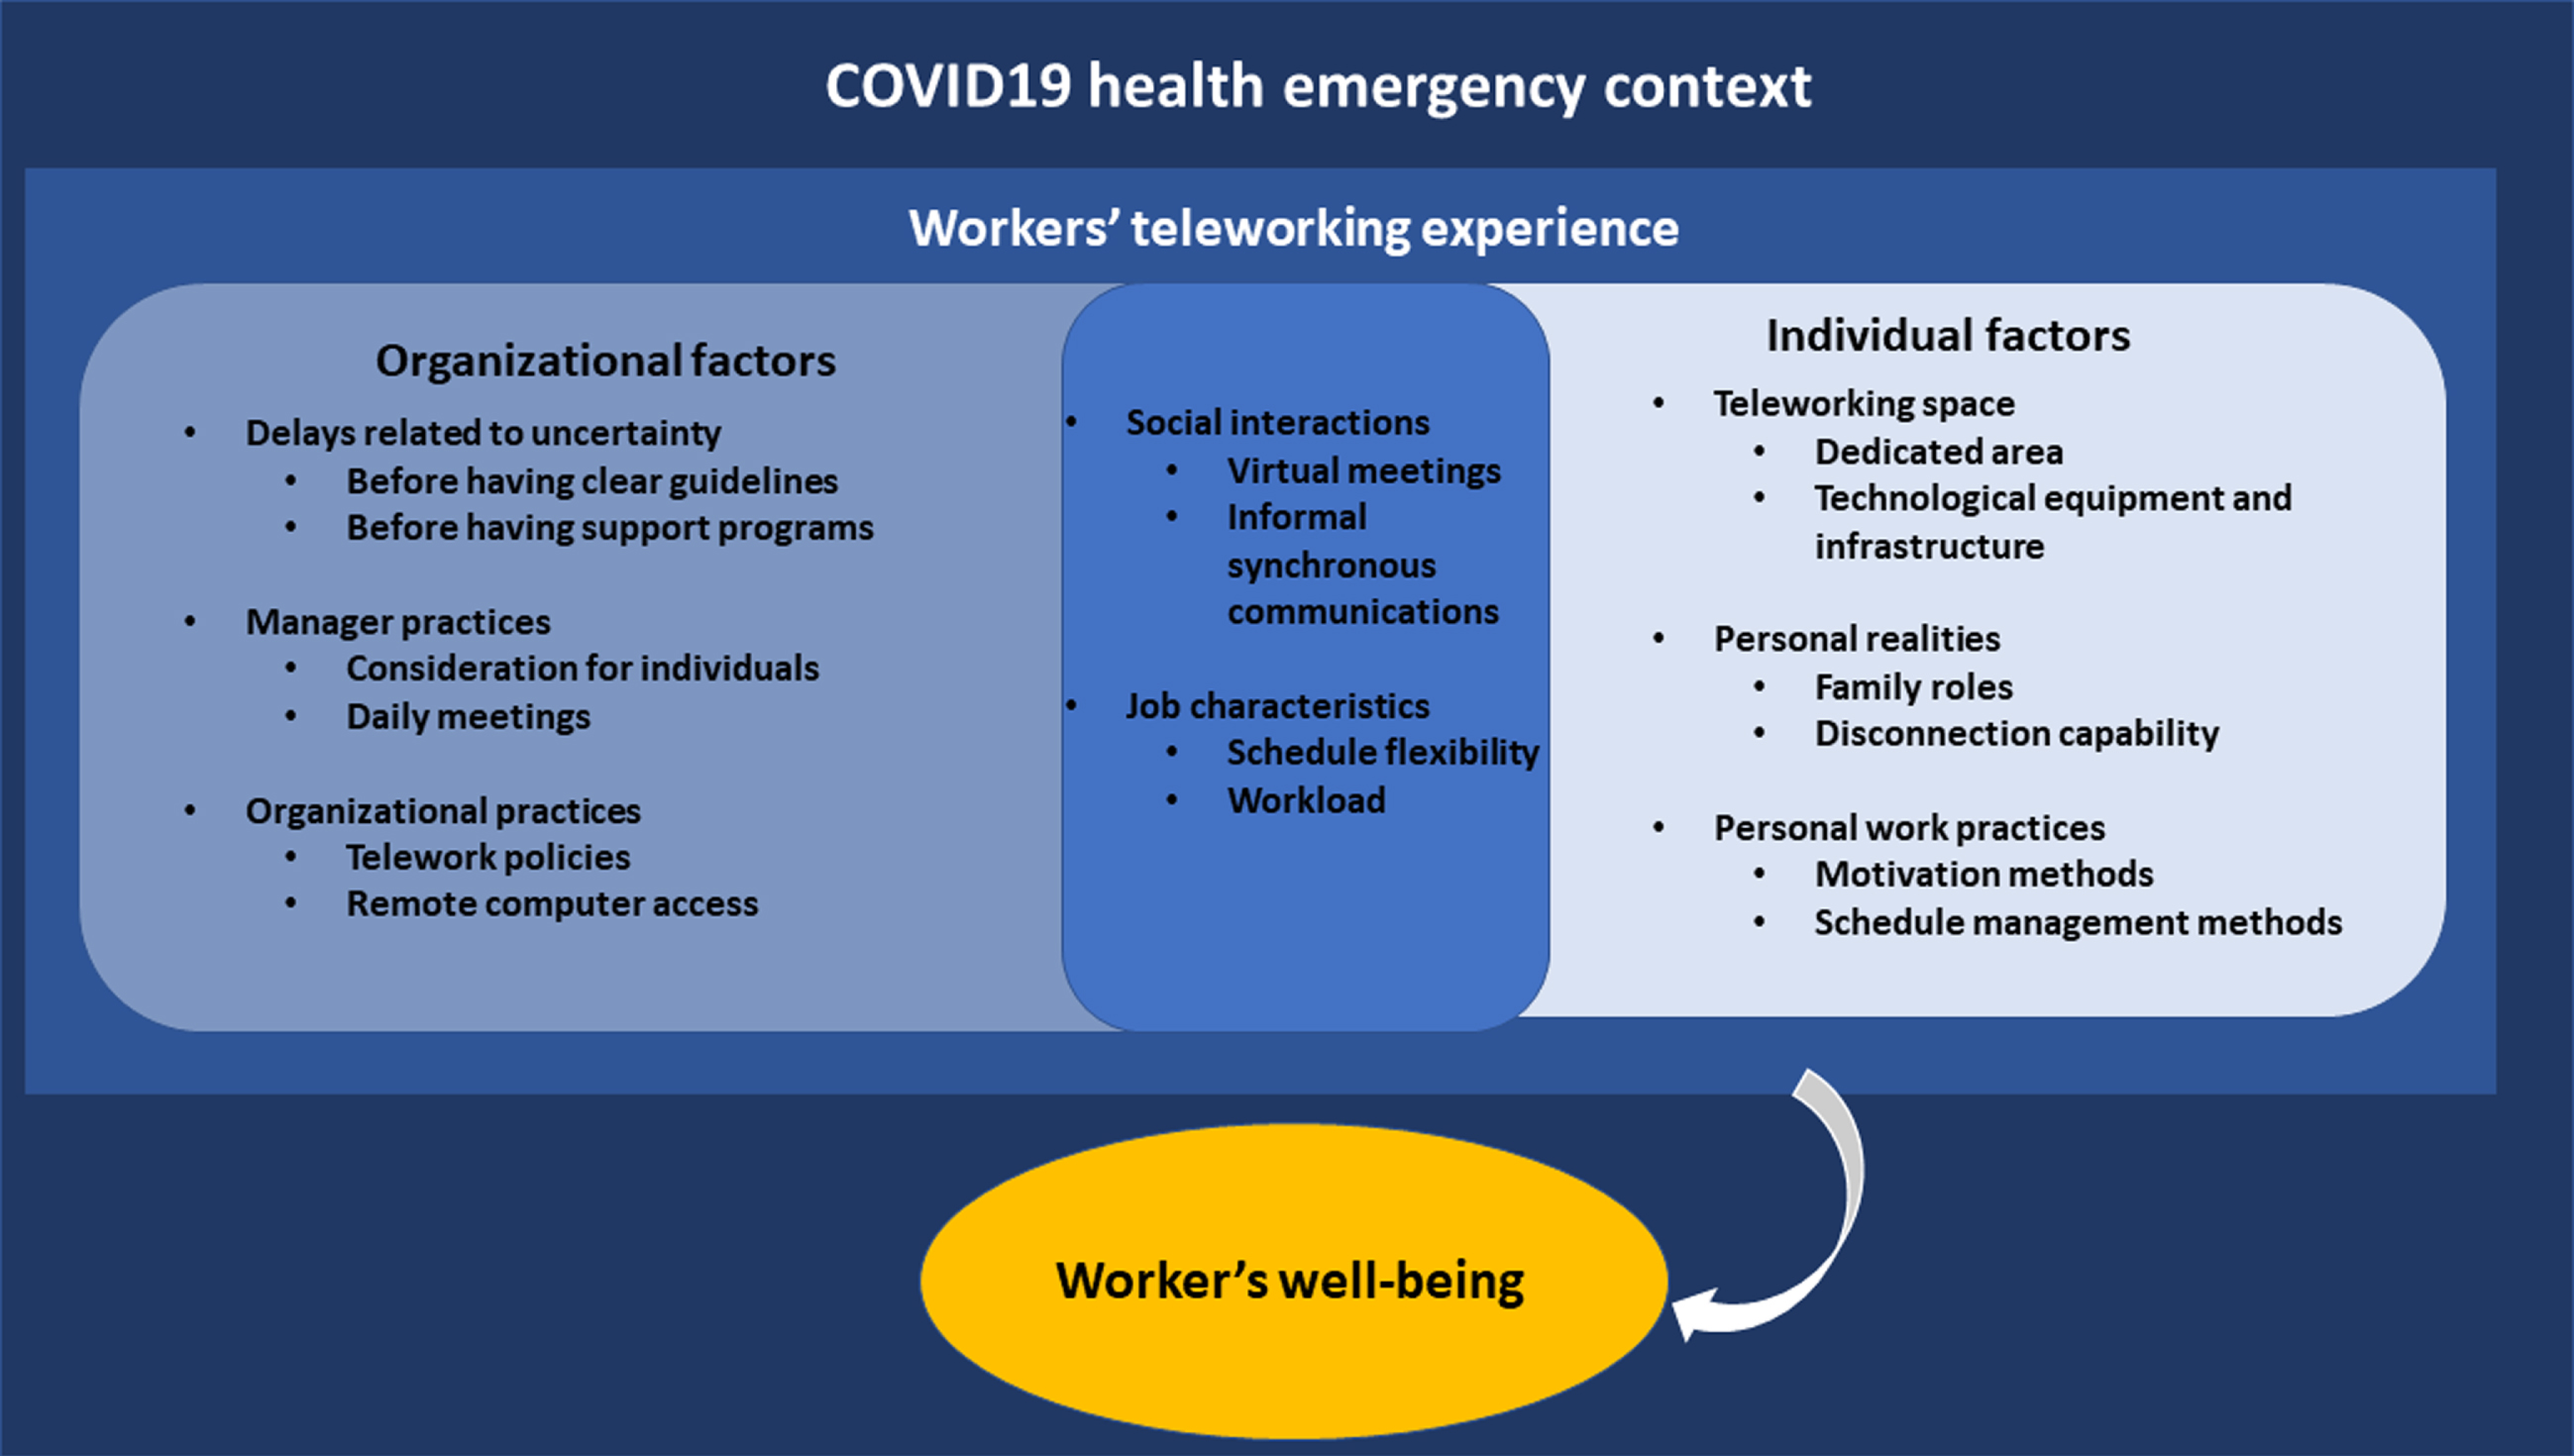 Factors influencing teleworkers’ well-being during the pandemic.